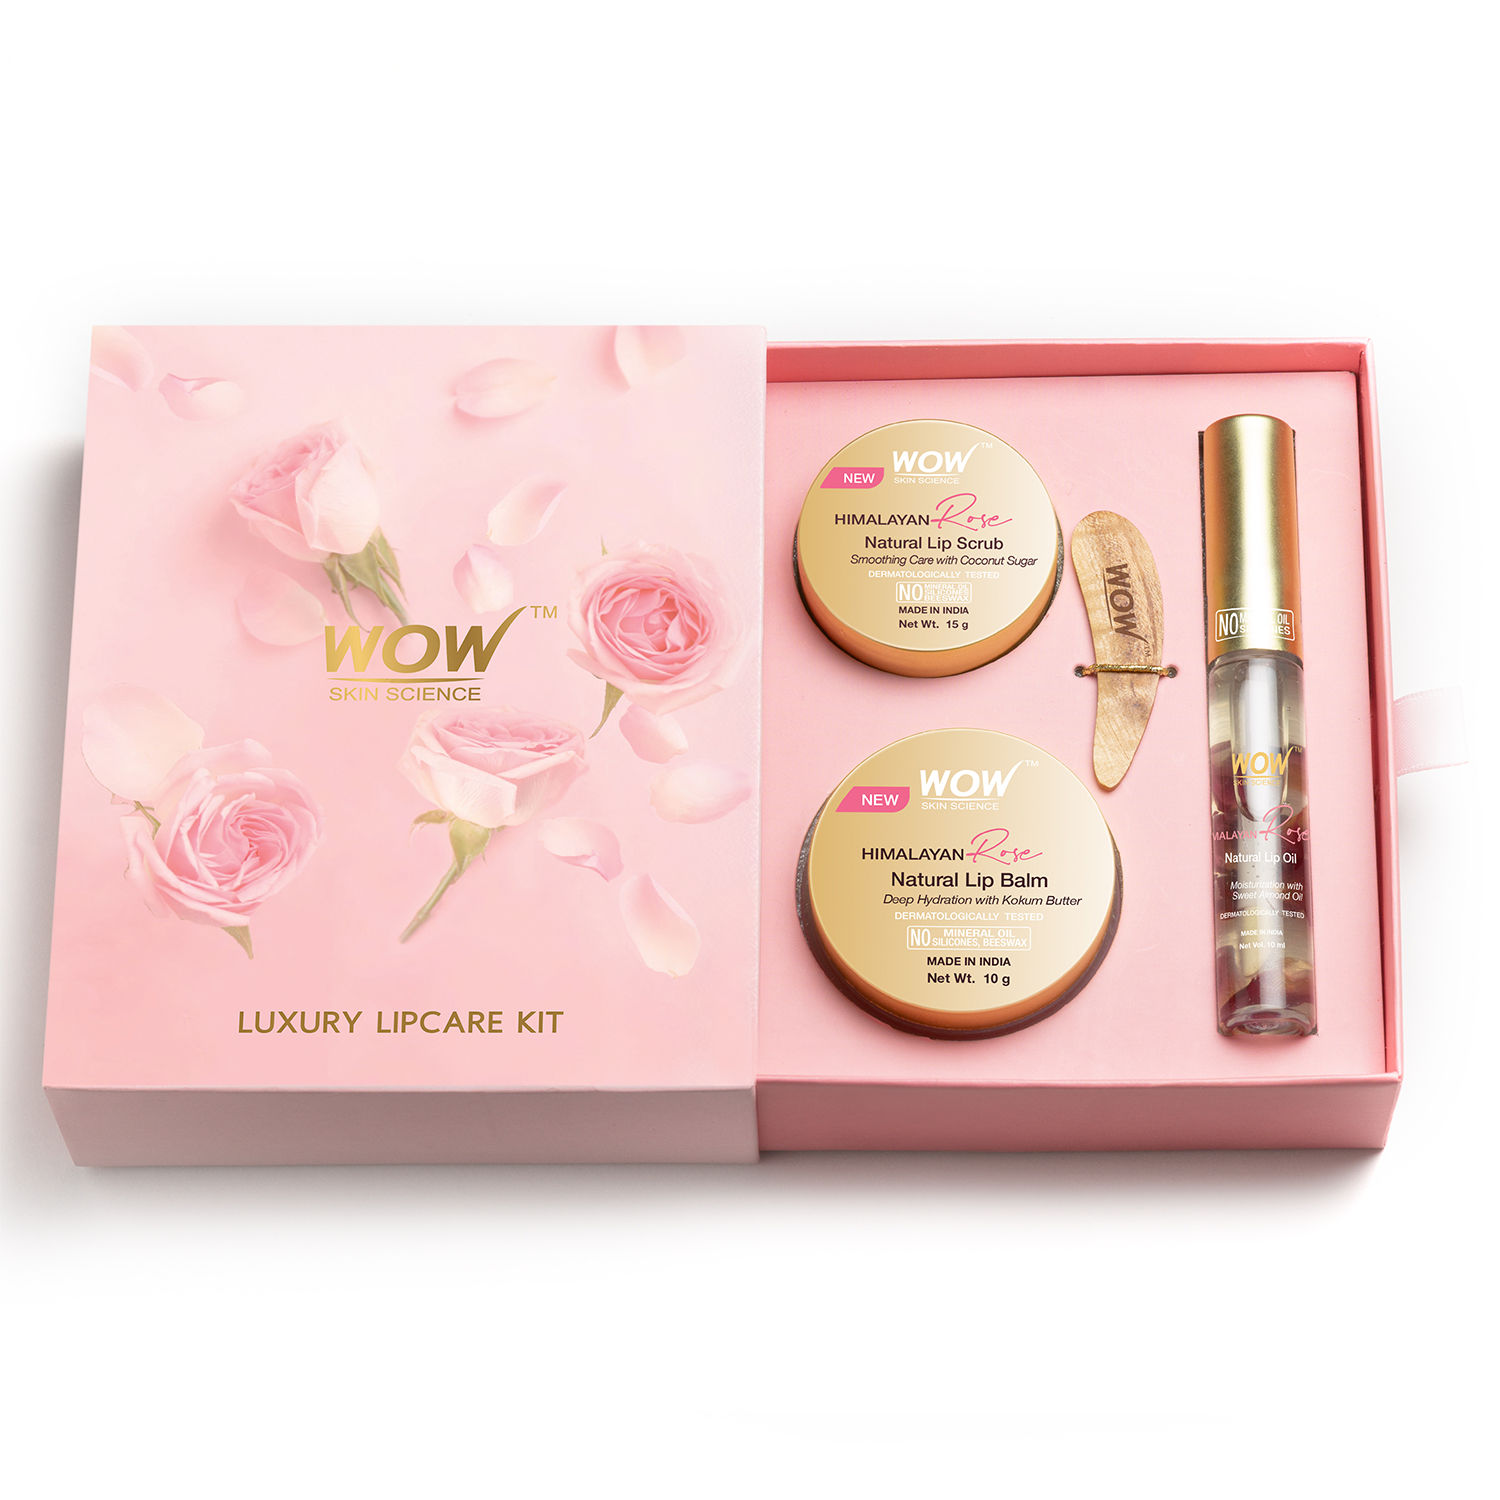 Buy WOW Skin Science Luxury Lip Care Kit for Dry, Rough, Chapped Lips with Goodness of 100% Natural Himalayan Pure Rose Oil - Lip Smoothing and Softening Nourishment 10 gm+10ml - Purplle